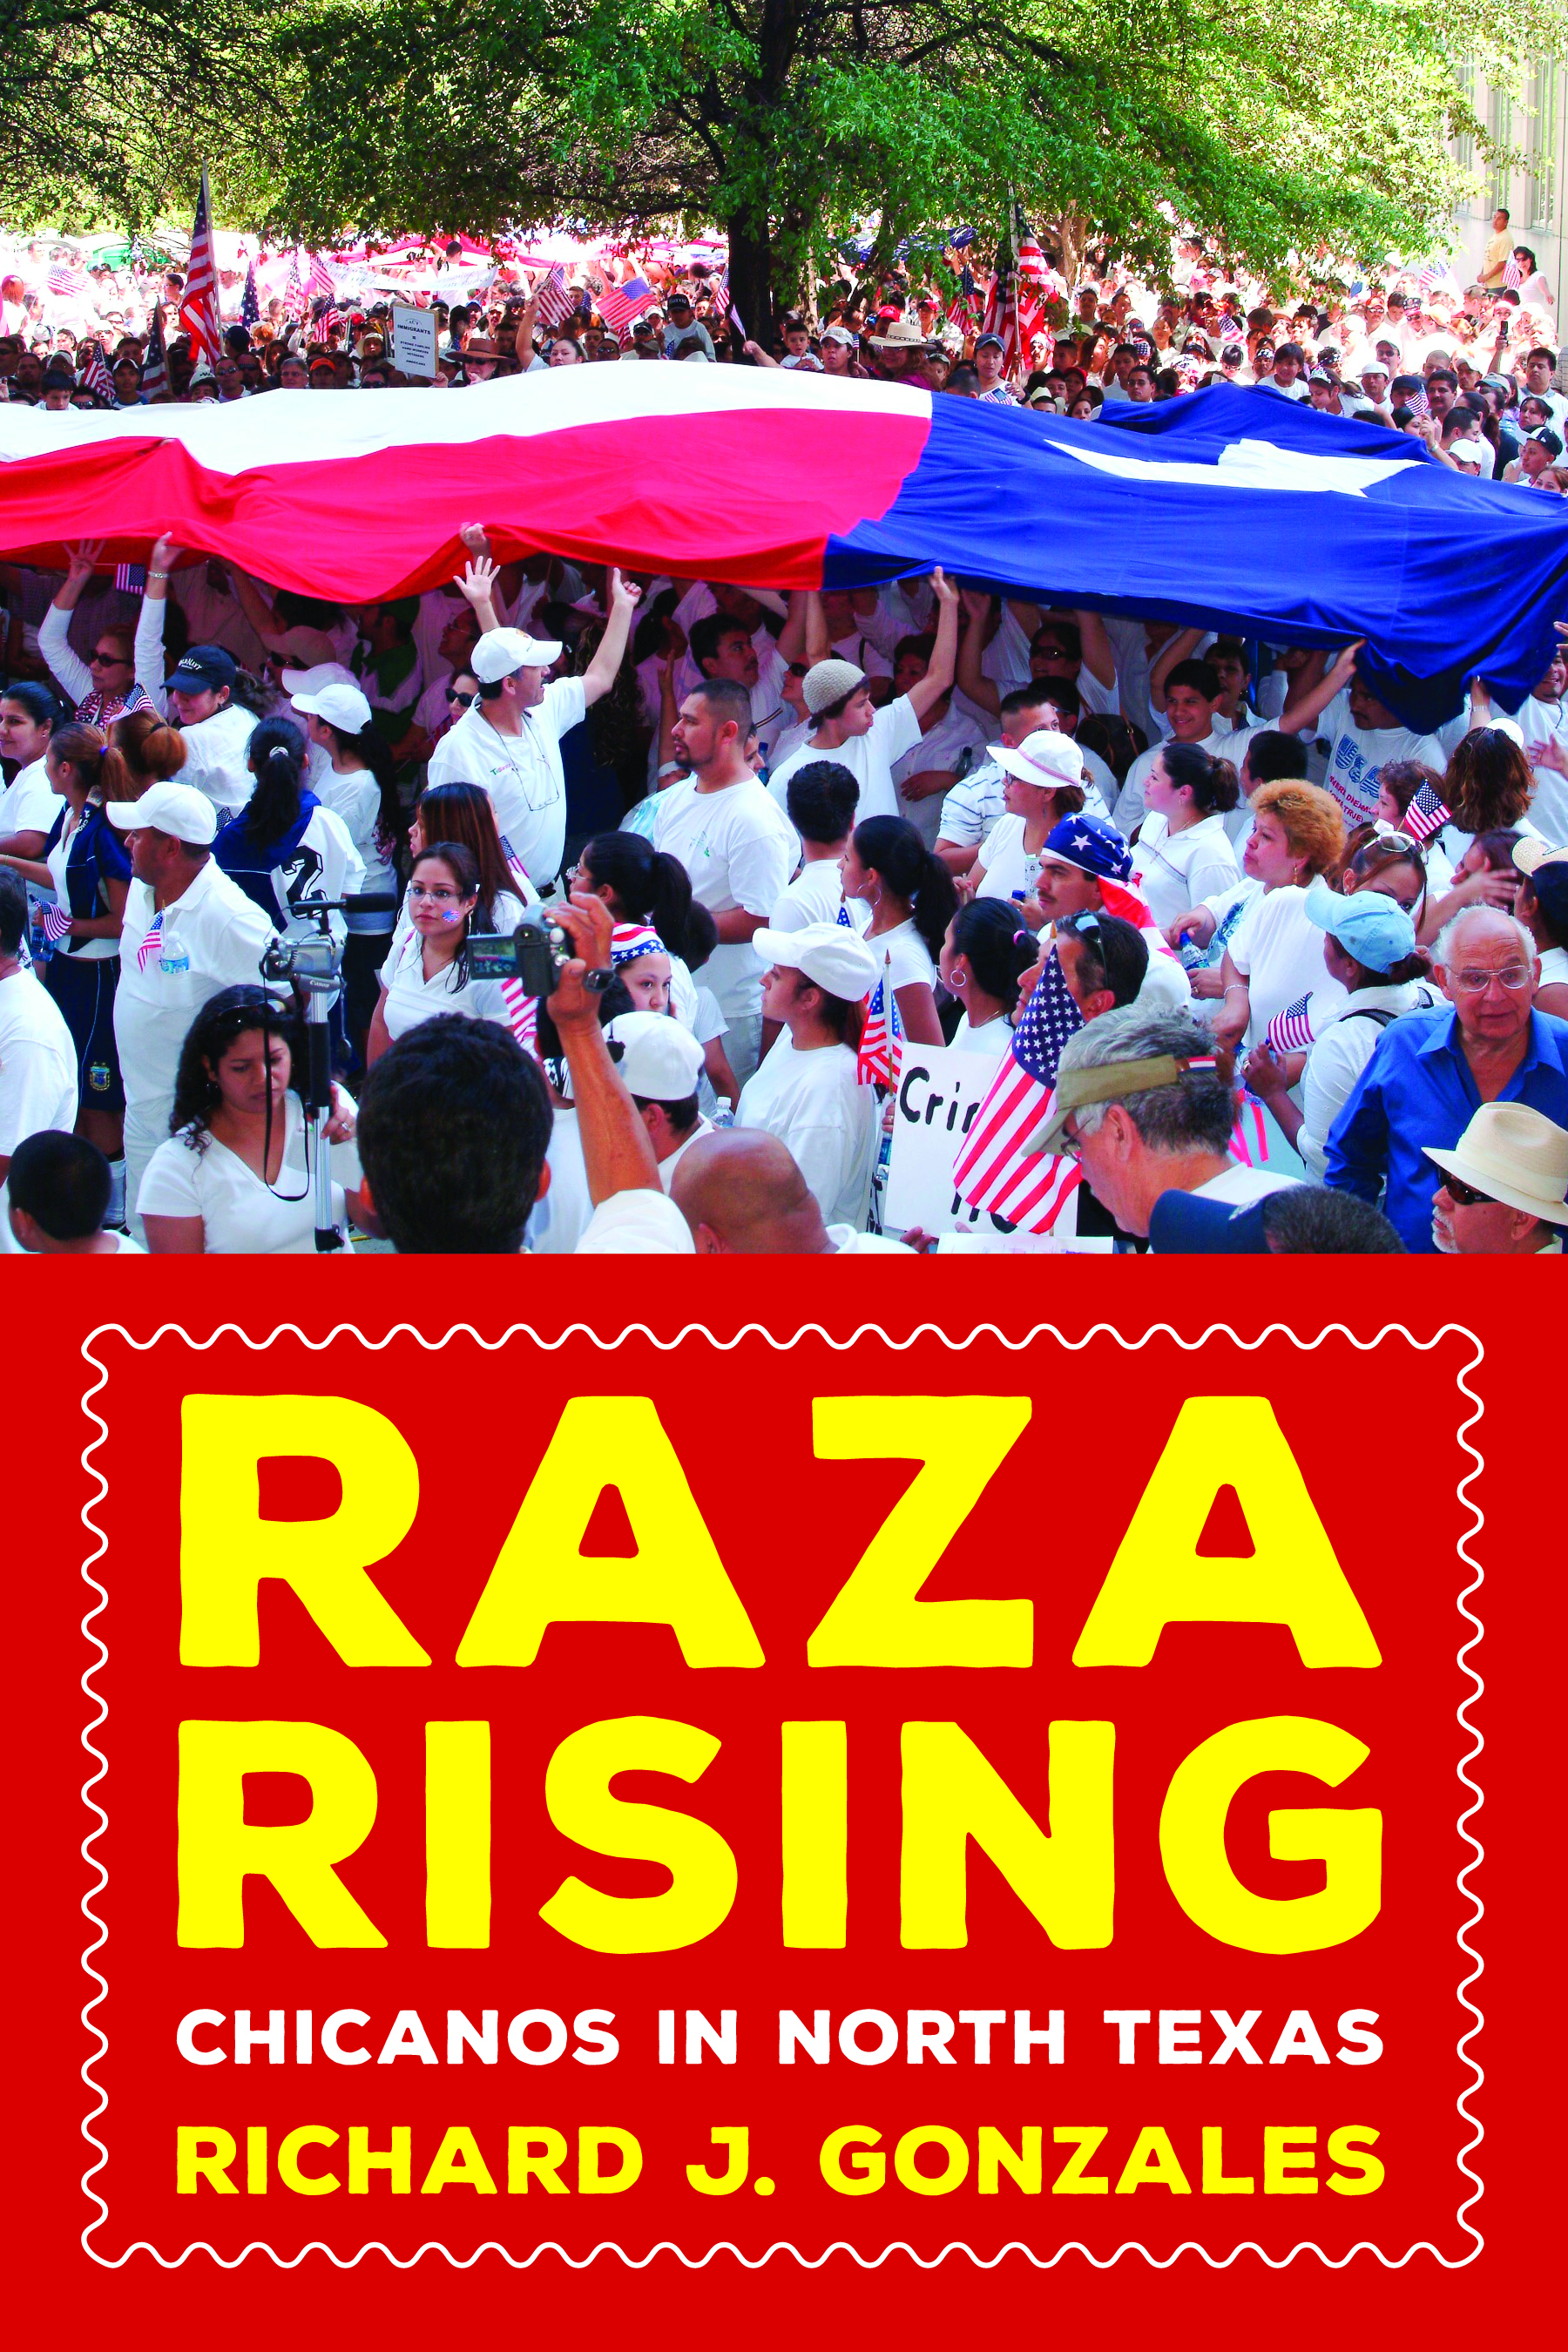 Raza Rising: Chicanos in North Texas, a book by Richard J. Gonzales; published b